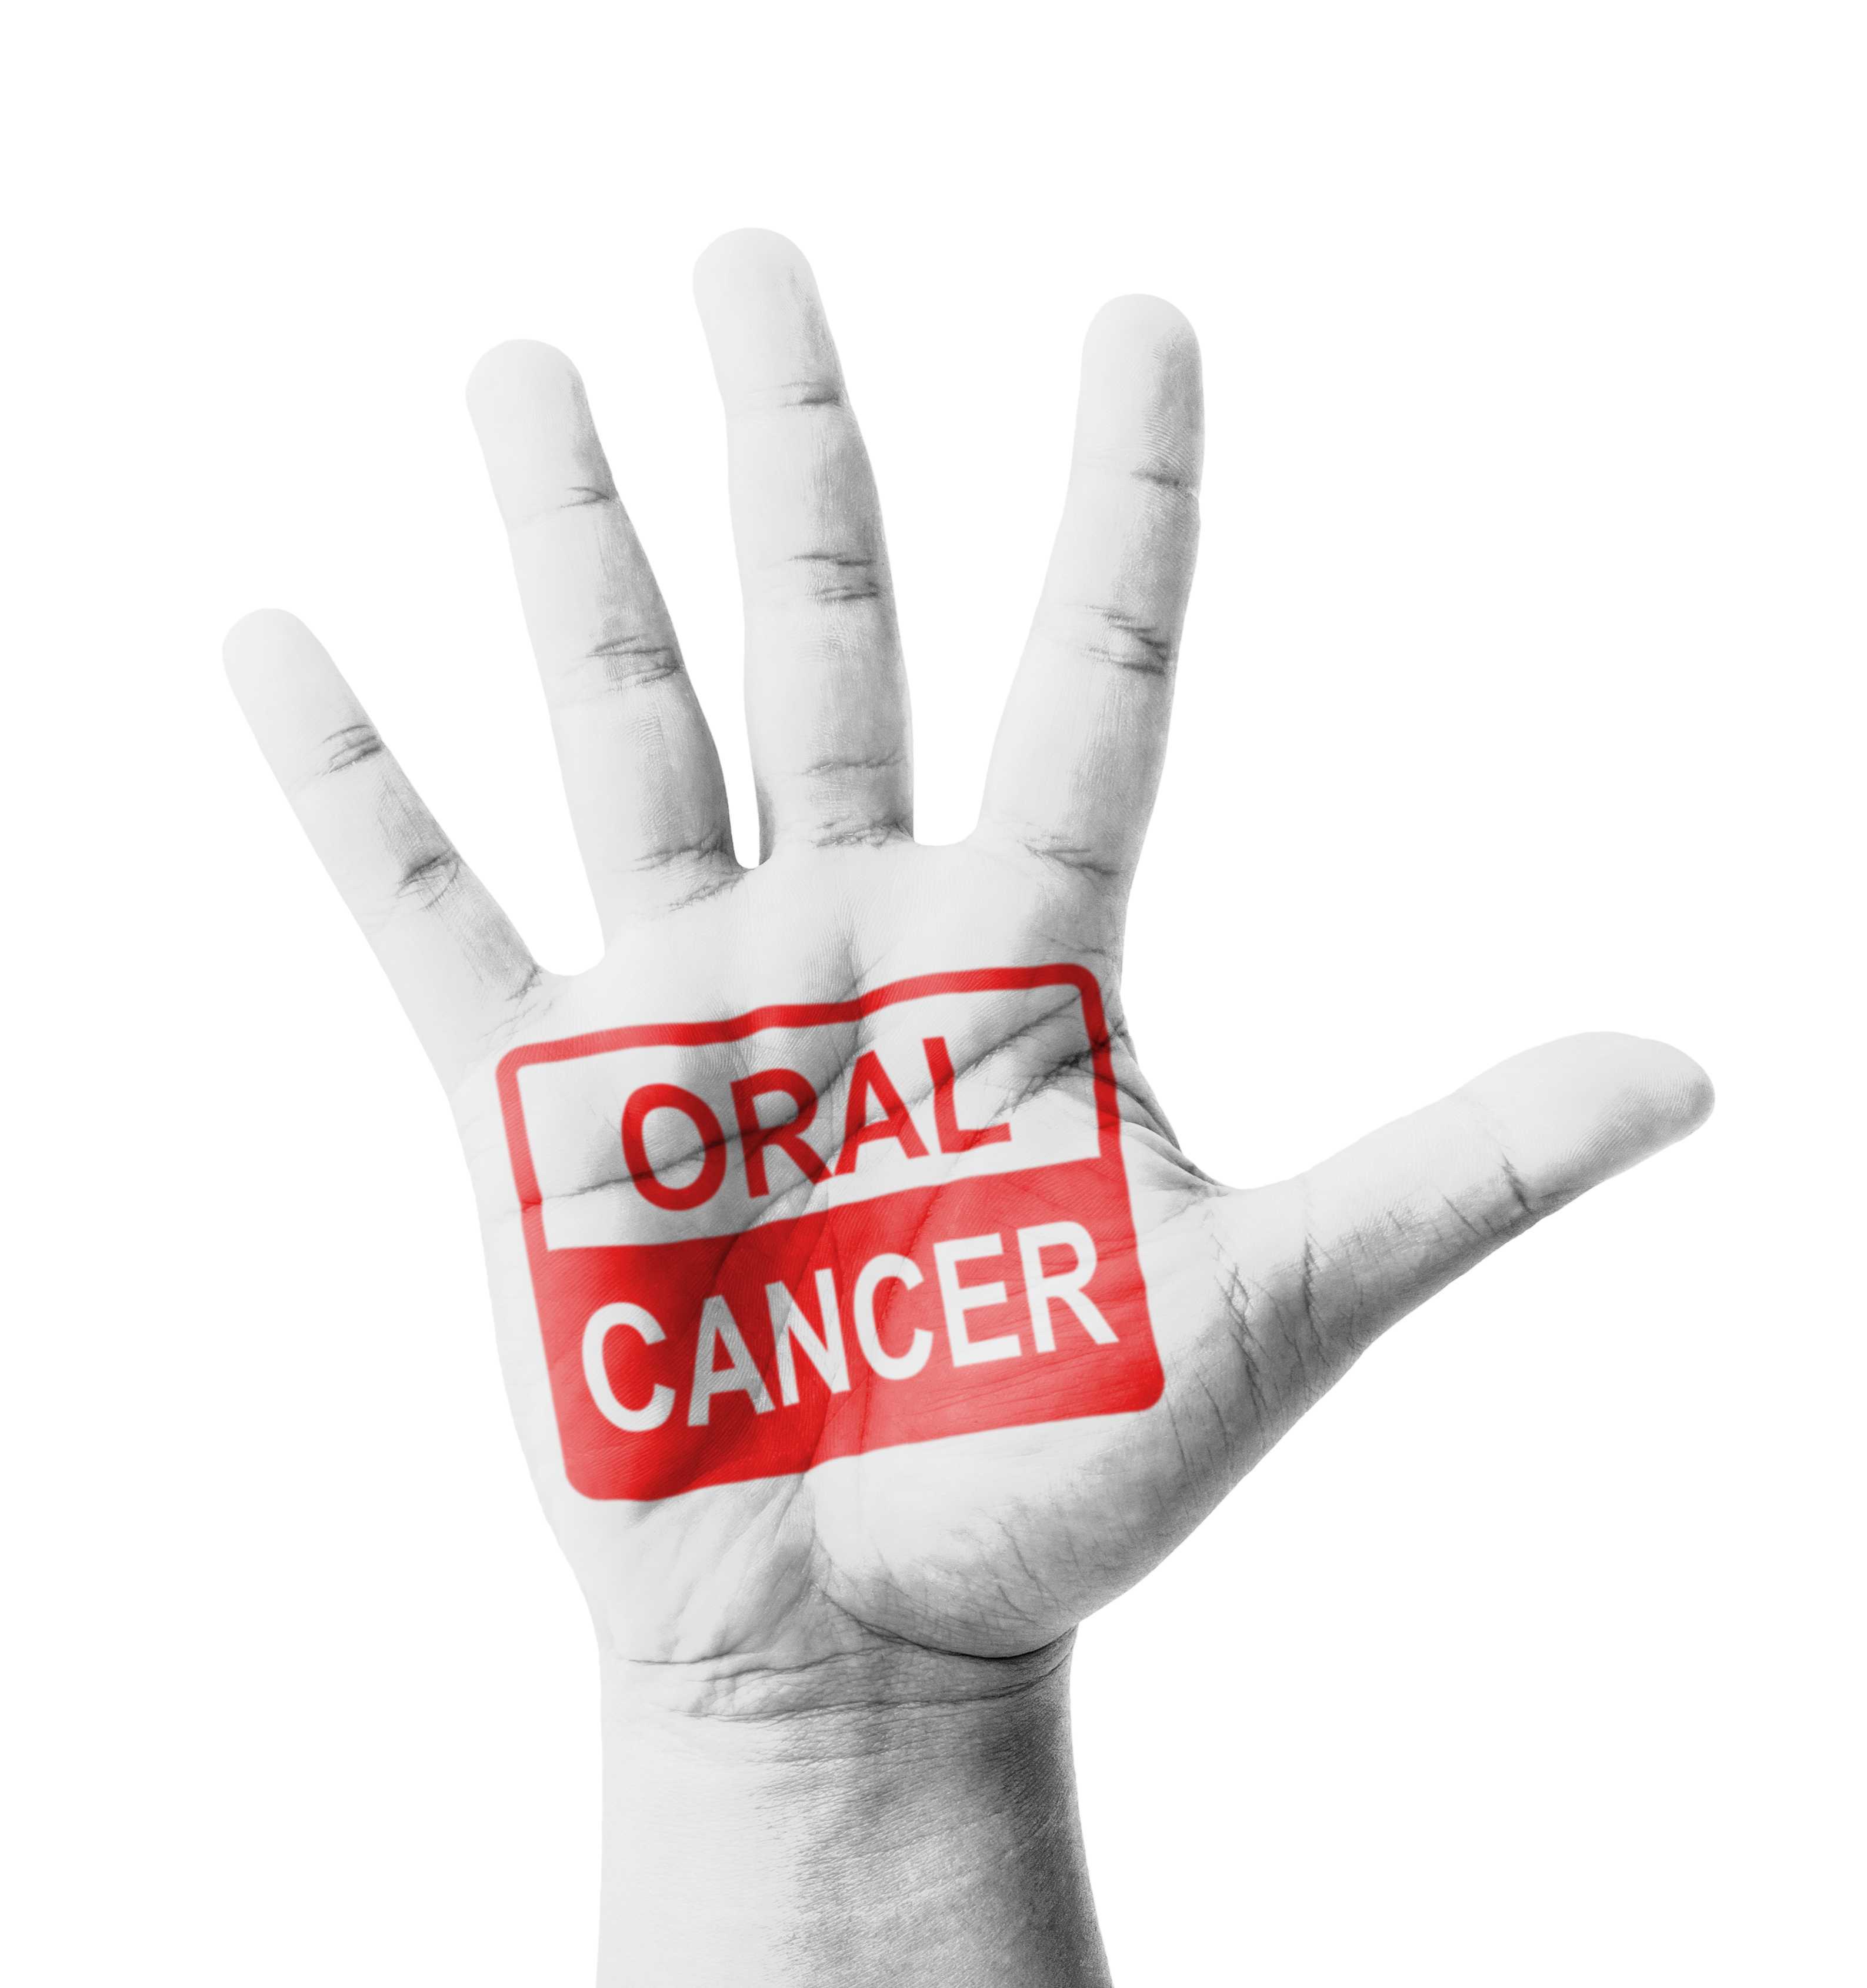 HPV-Related Oral Cancer is on the Rise in American Men